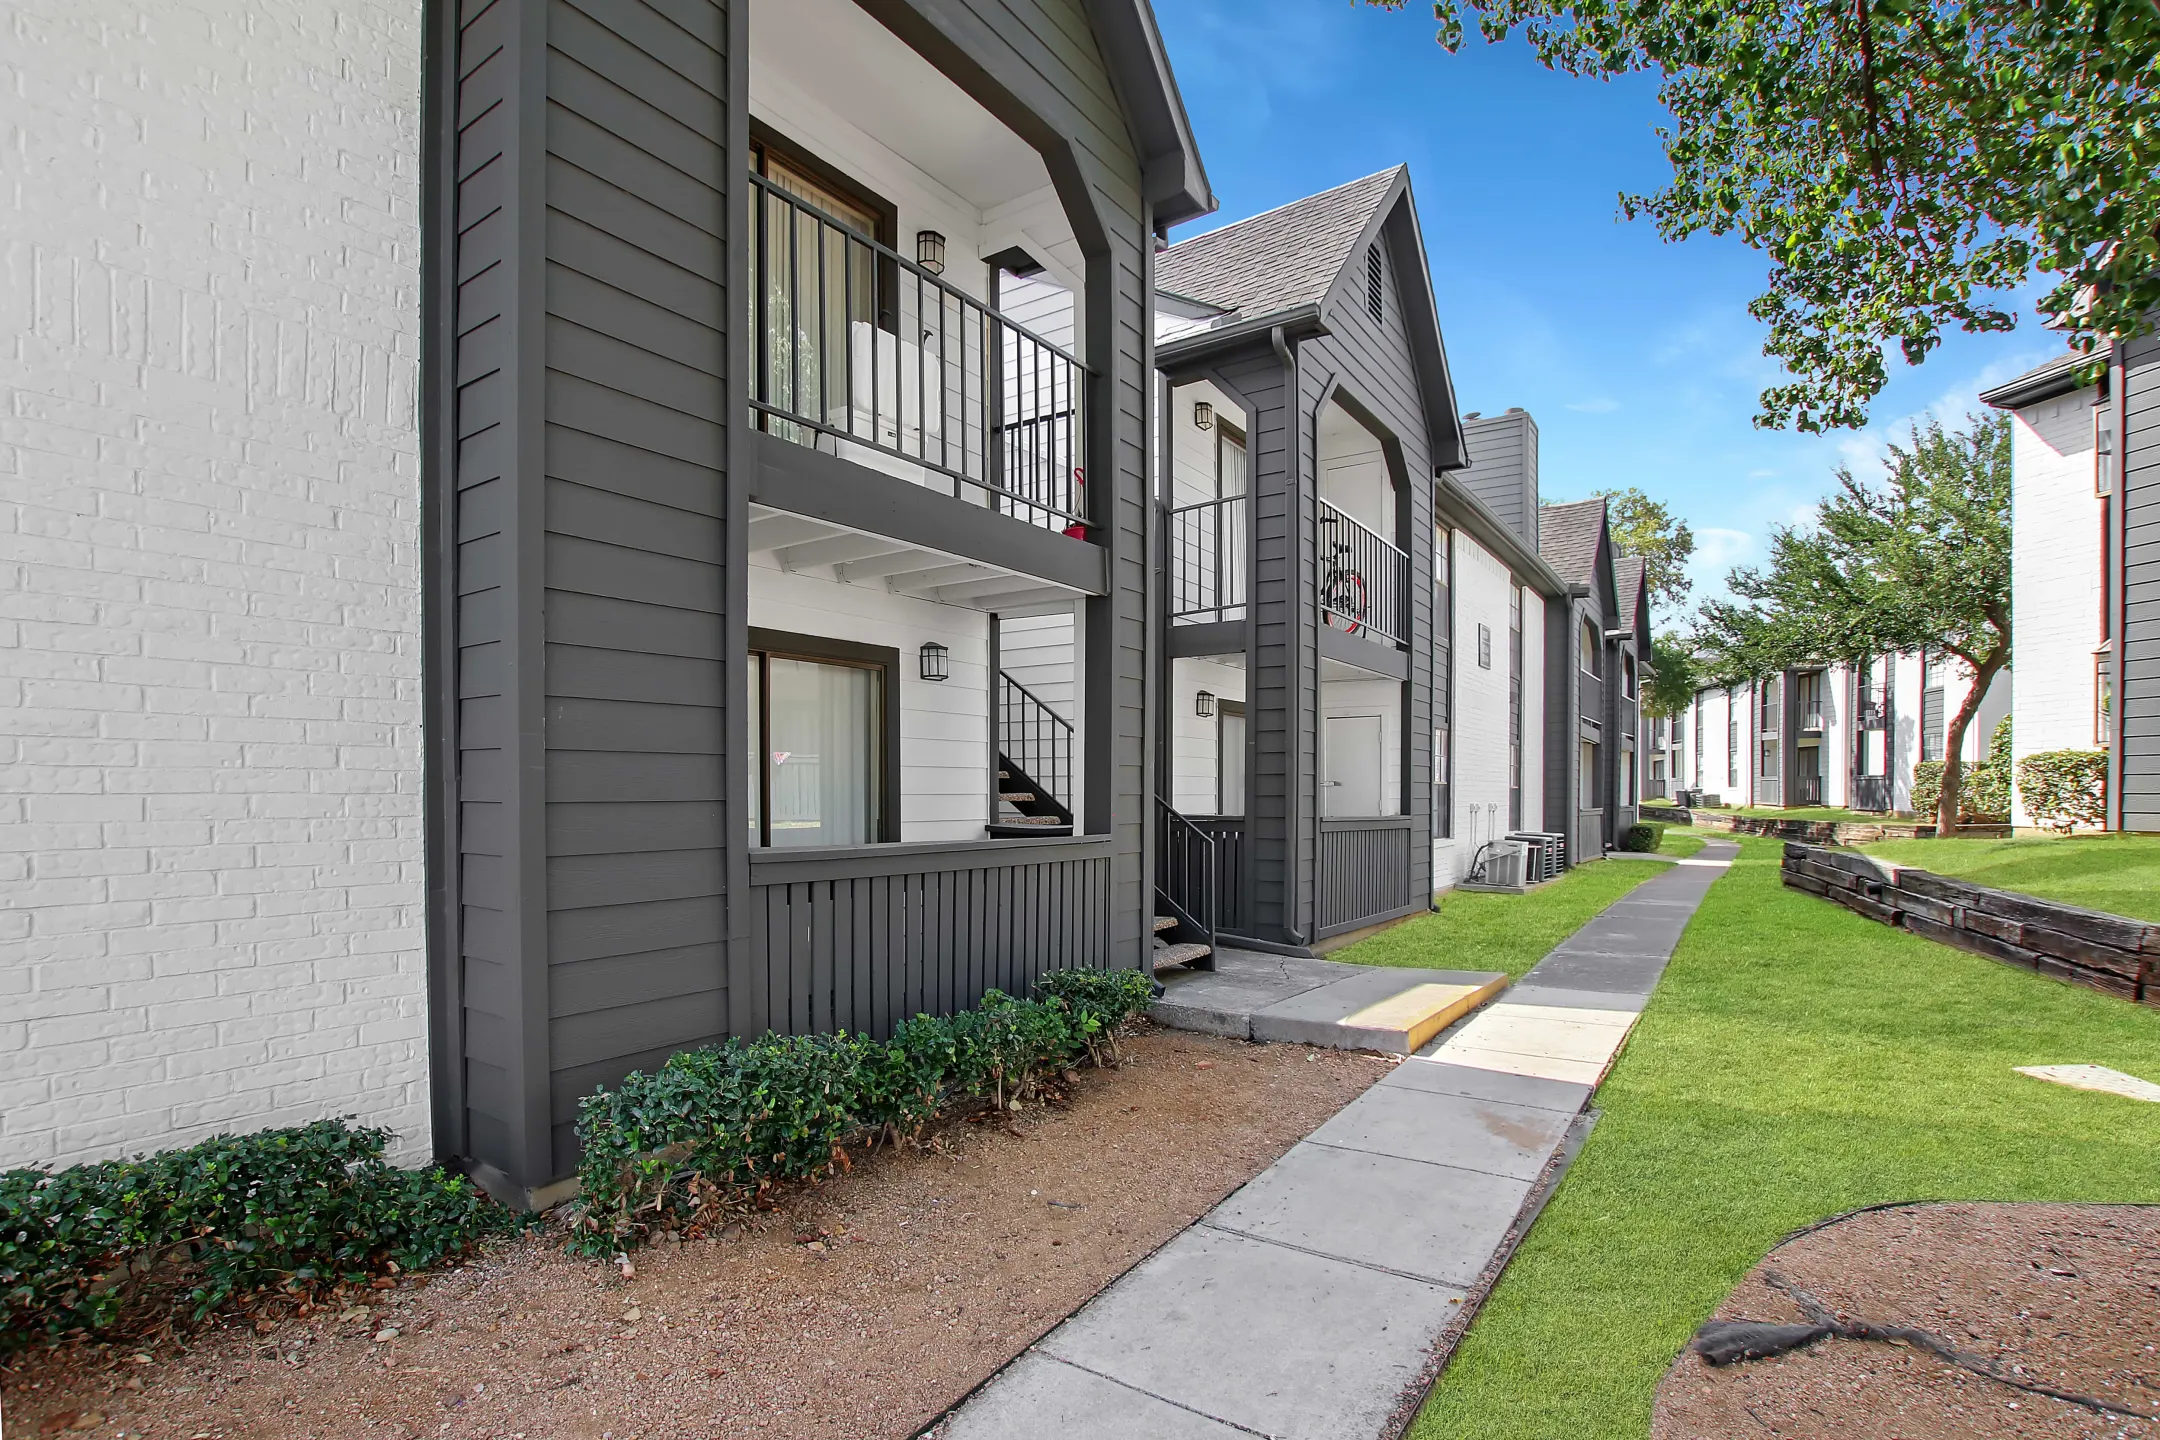 Building - Wythe Apartment Homes - Irving, TX